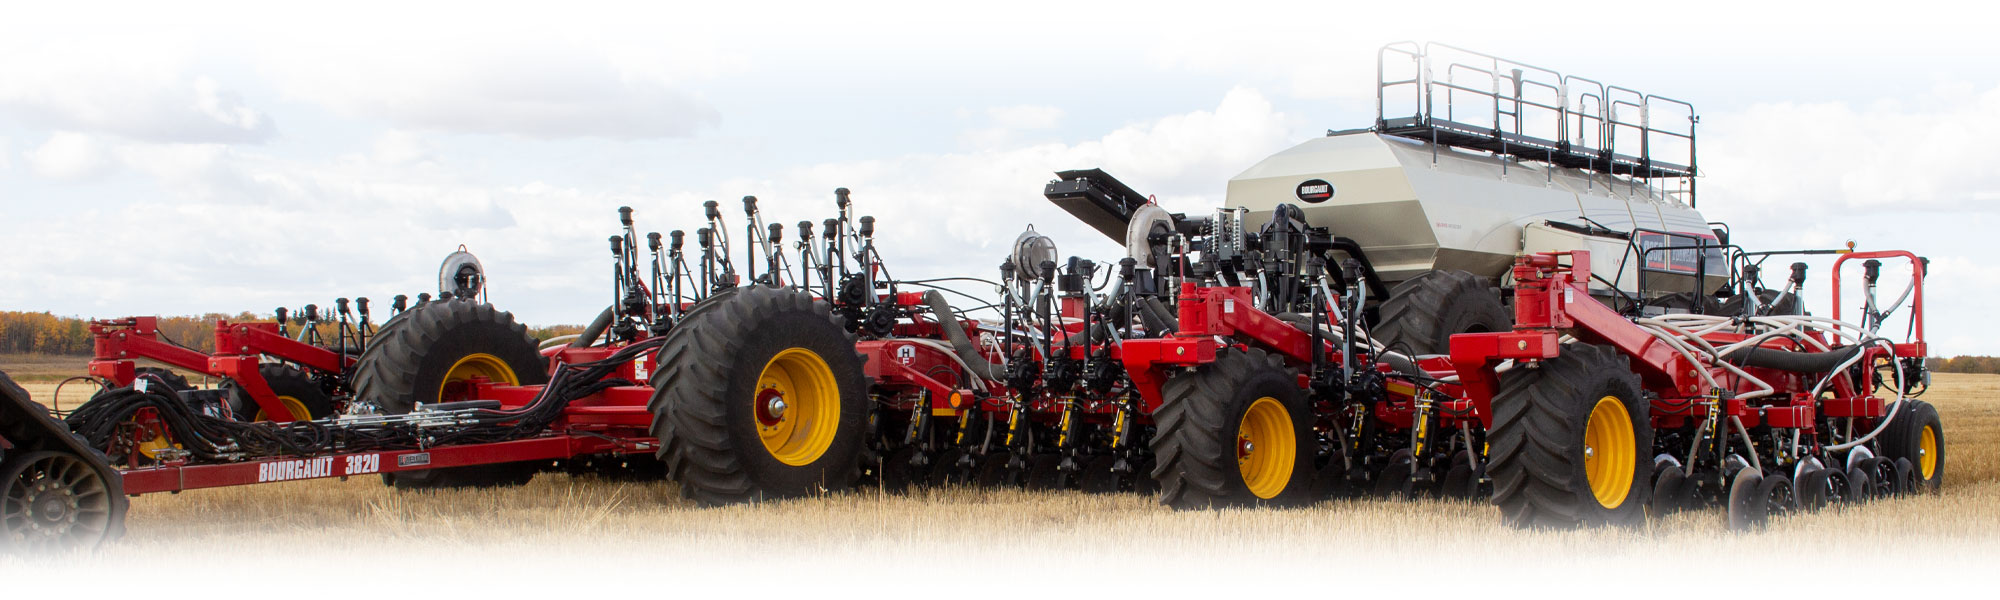 3820 ParaLink Coulter Drill with optional Air Planter and 9950 Air Cart